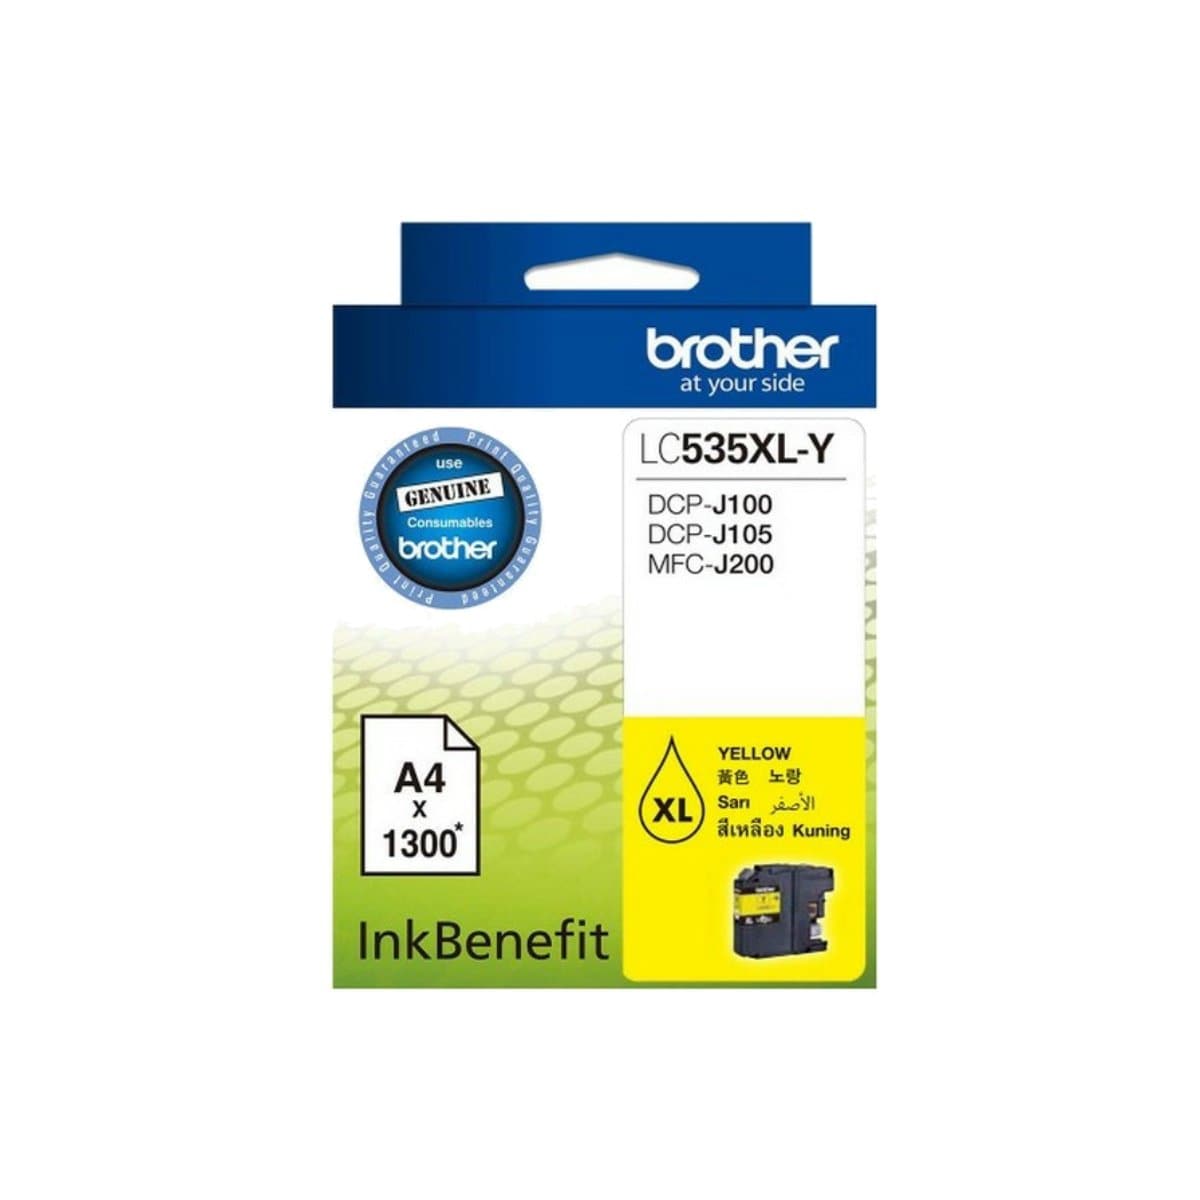 Brother LC535XL Yellow Ink Cartridge - LC535XLY